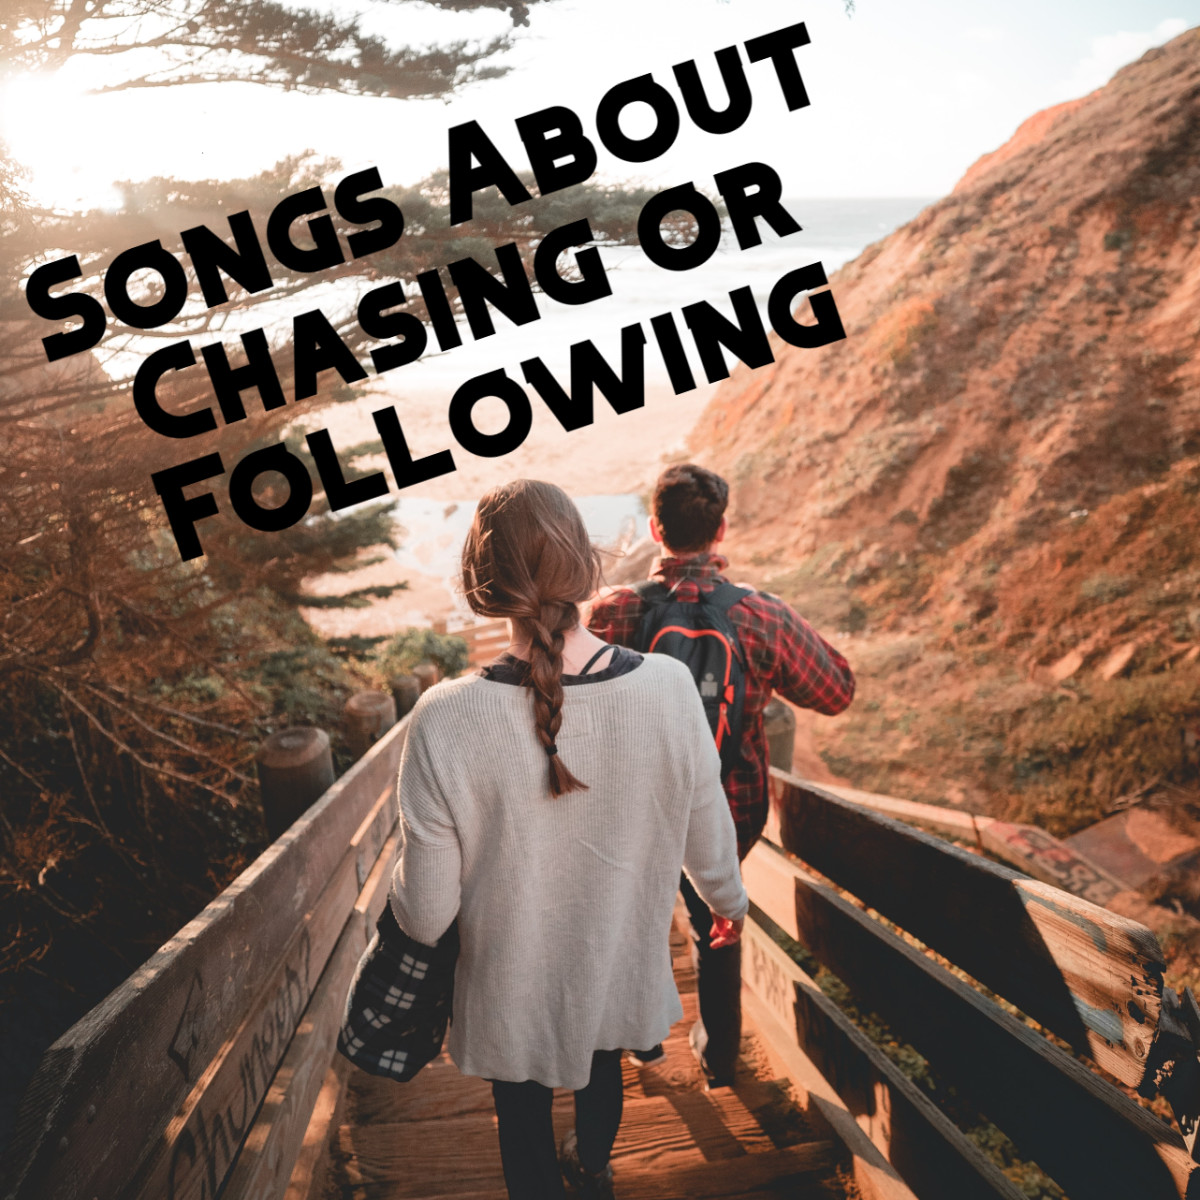 71 Songs About Chasing or Following